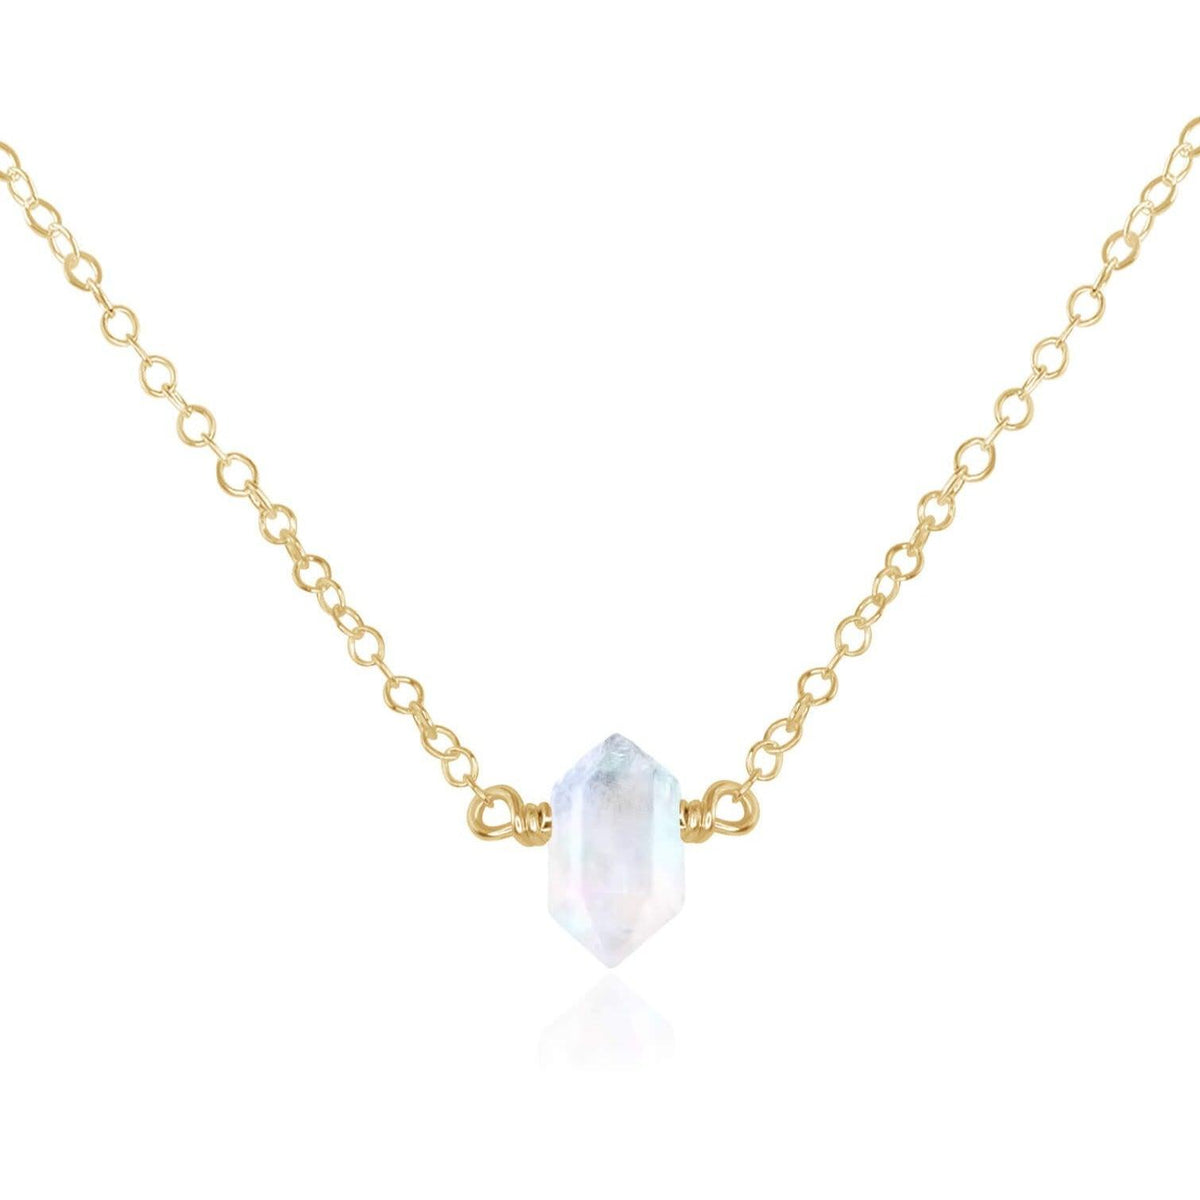 Double Terminated Crystal Necklace - 14K Gold Fill - Luna Tide Handmade Jewellery